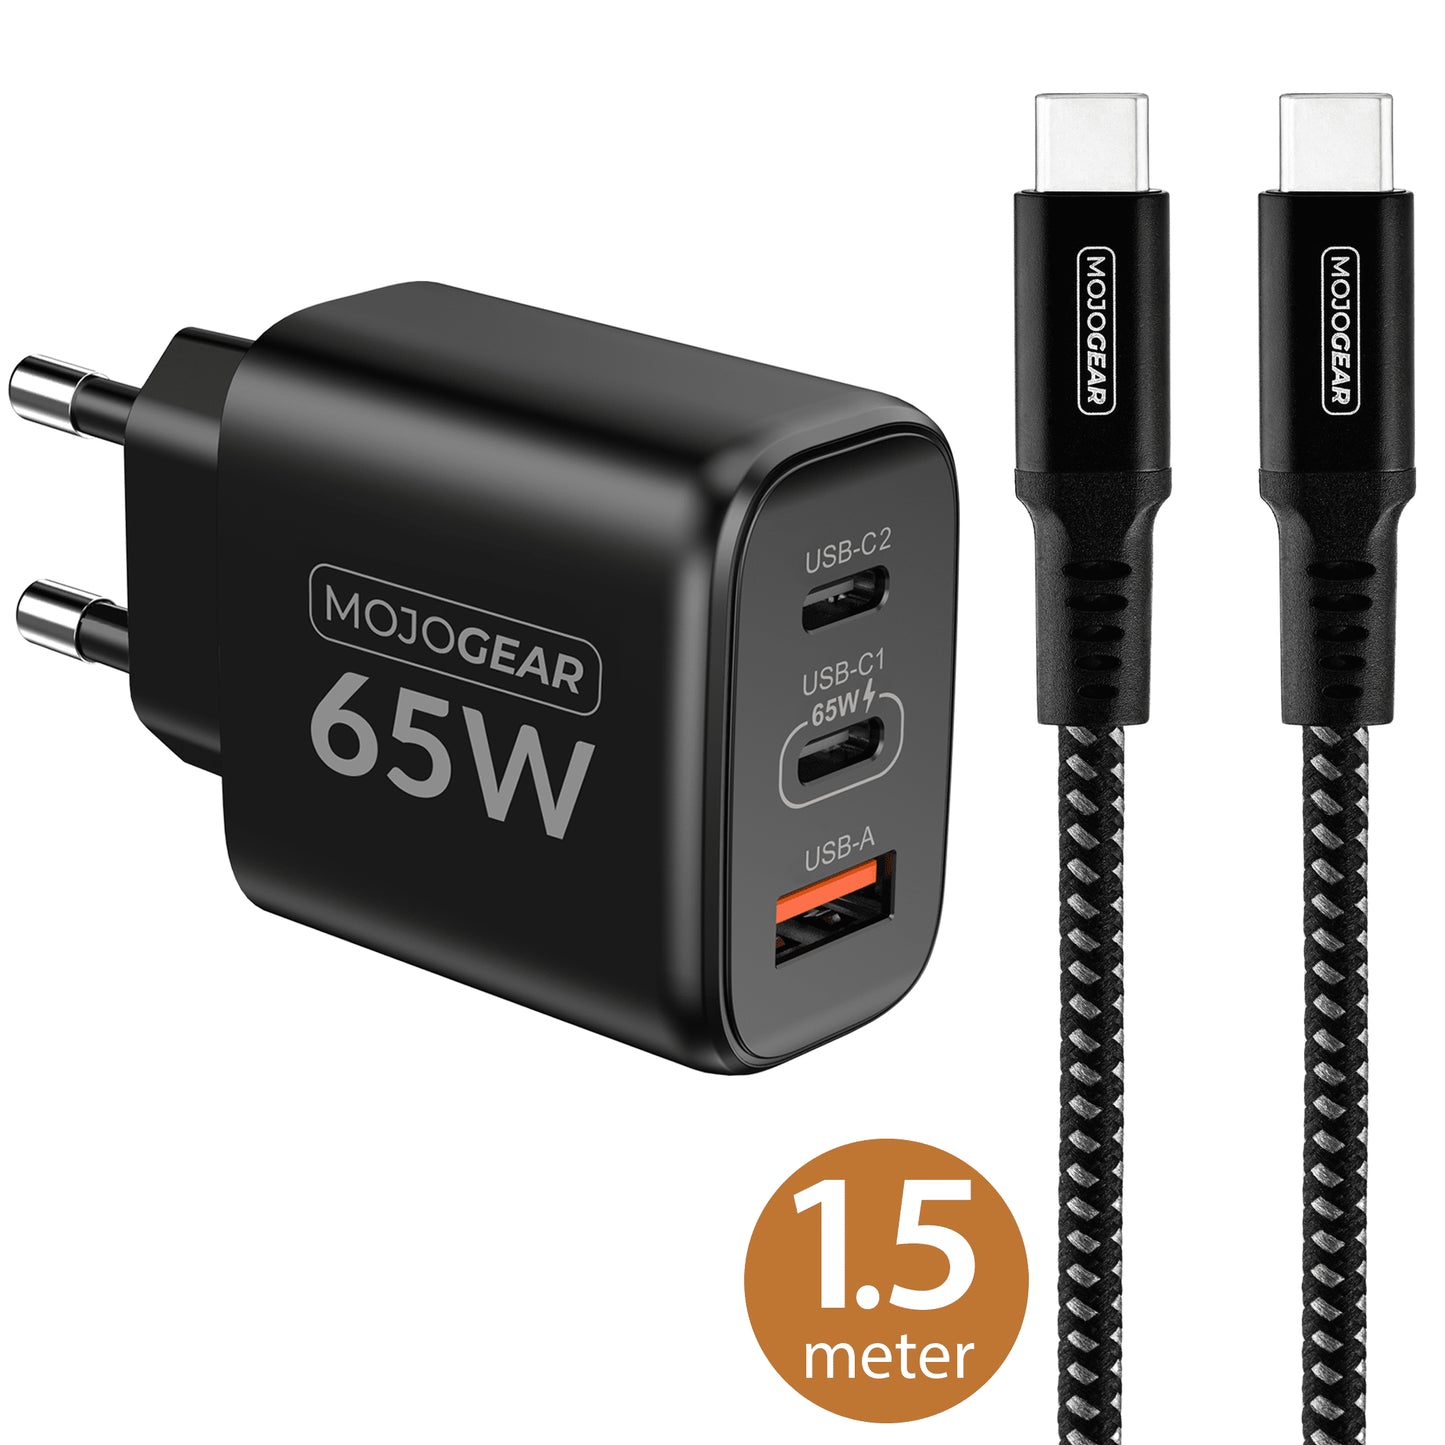 MOJOGEAR CHARGE+ Combo: 65W charger with USB-C cable 1.5 meters